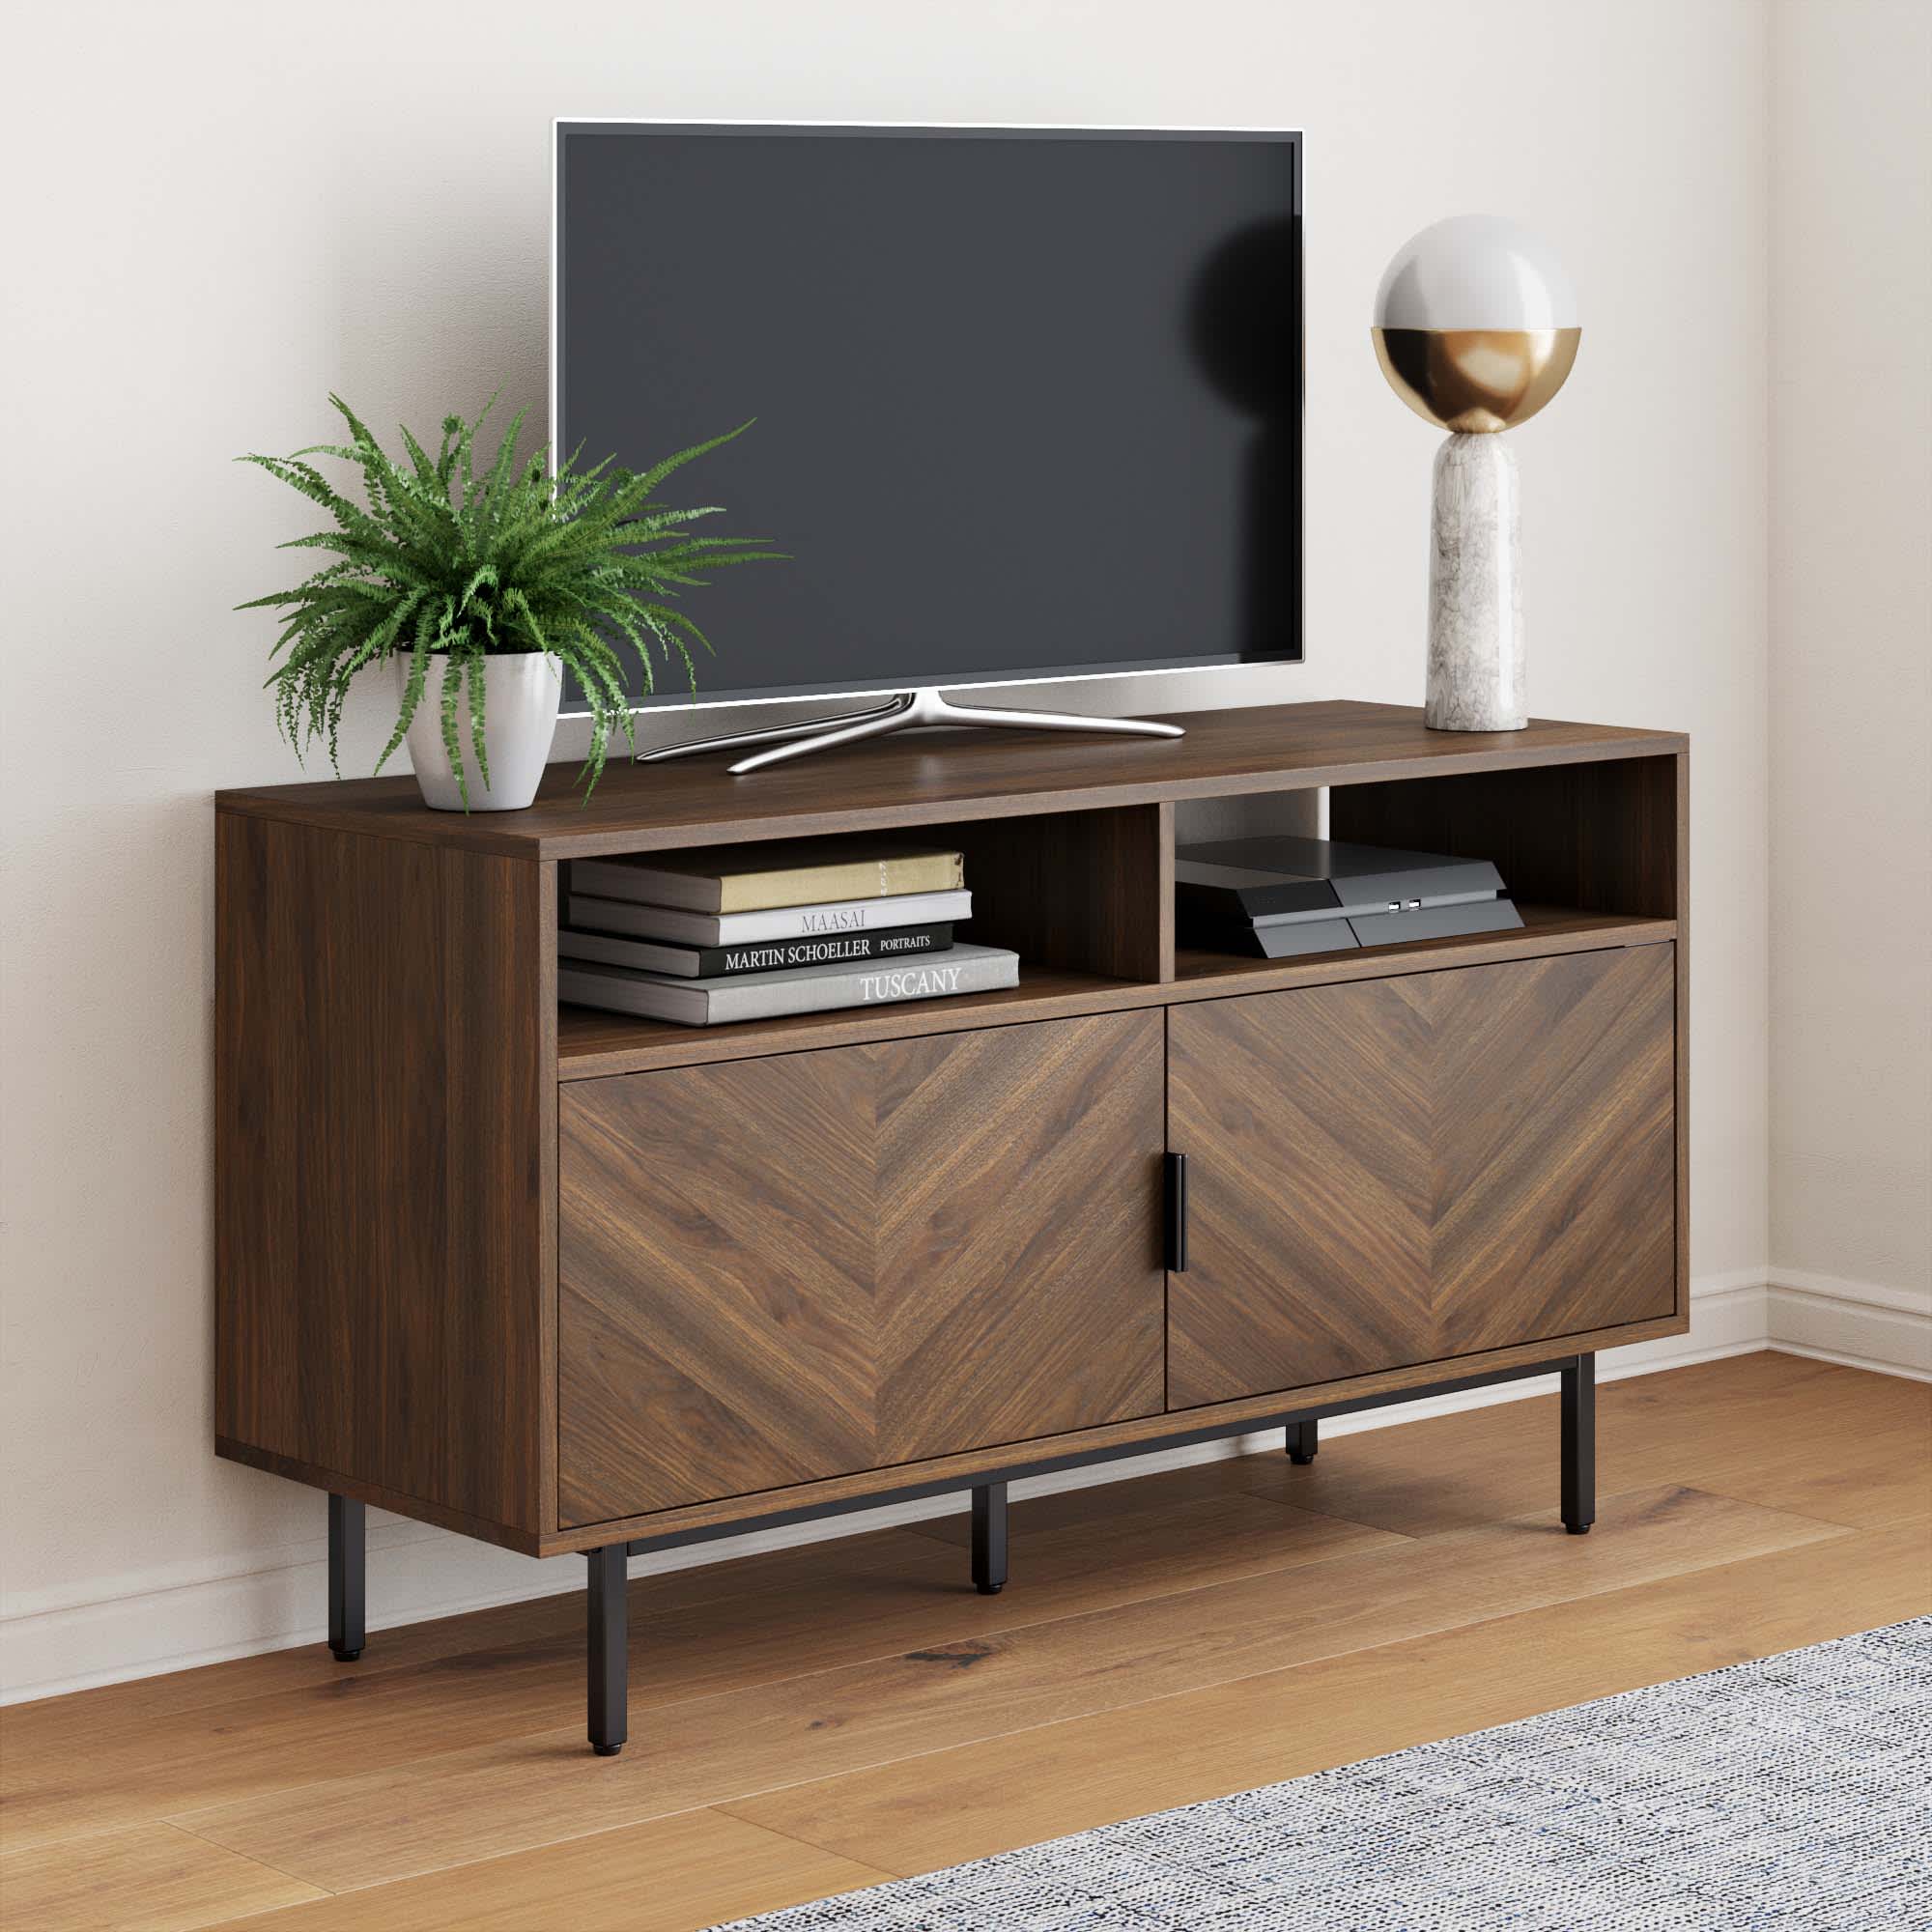 8 Best TV Stands for Small Spaces